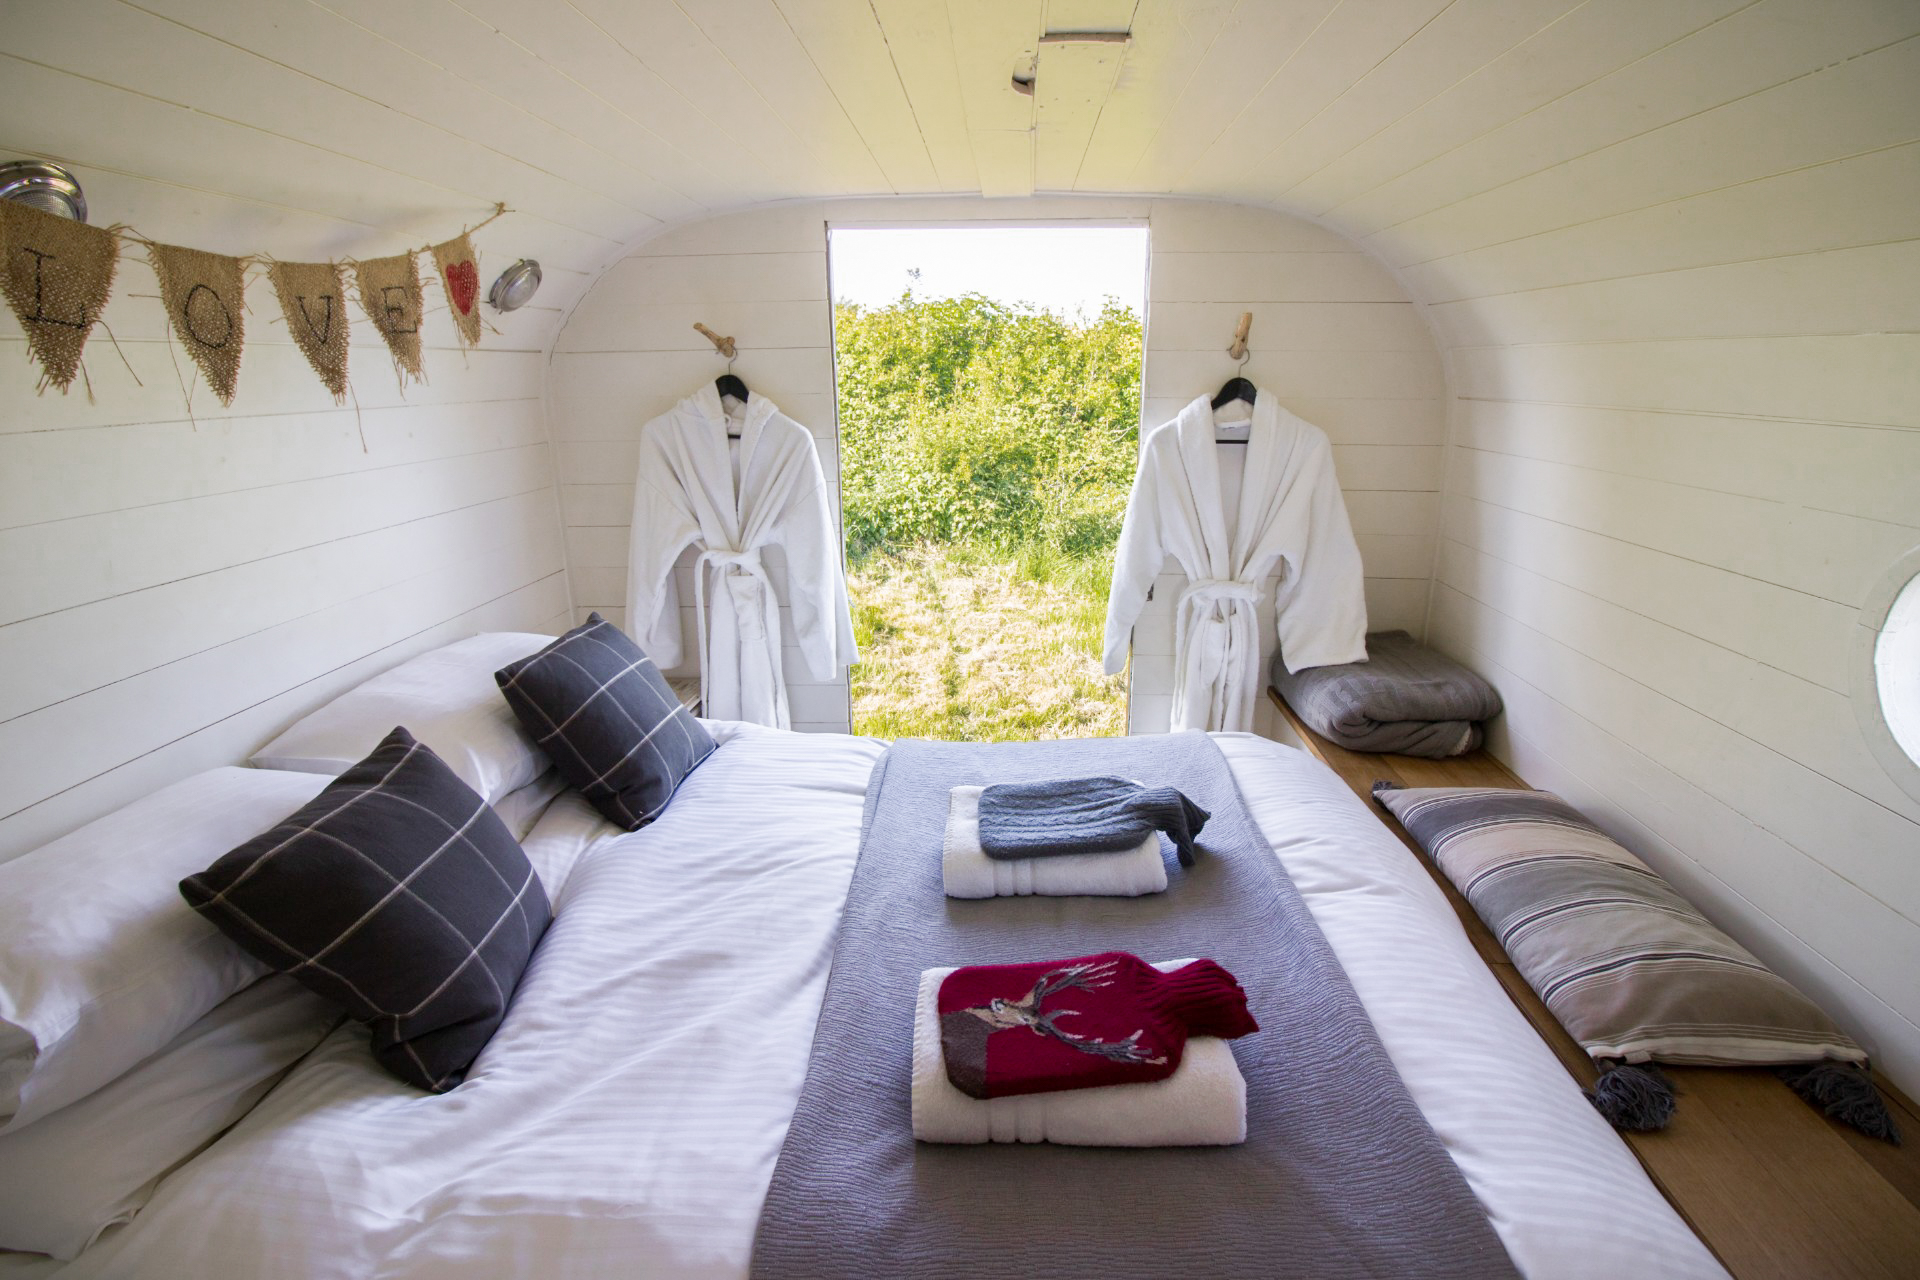 Herefordshire Hideaways: Winding Down in the Stargazor's Wagon. Find out more about my recent staycation and glamping trip to Herefordshire, England, UK. We stayed in a quirky and rustic converted wagon which came with an outdoor wood-fired hot tub! Click through to read more...